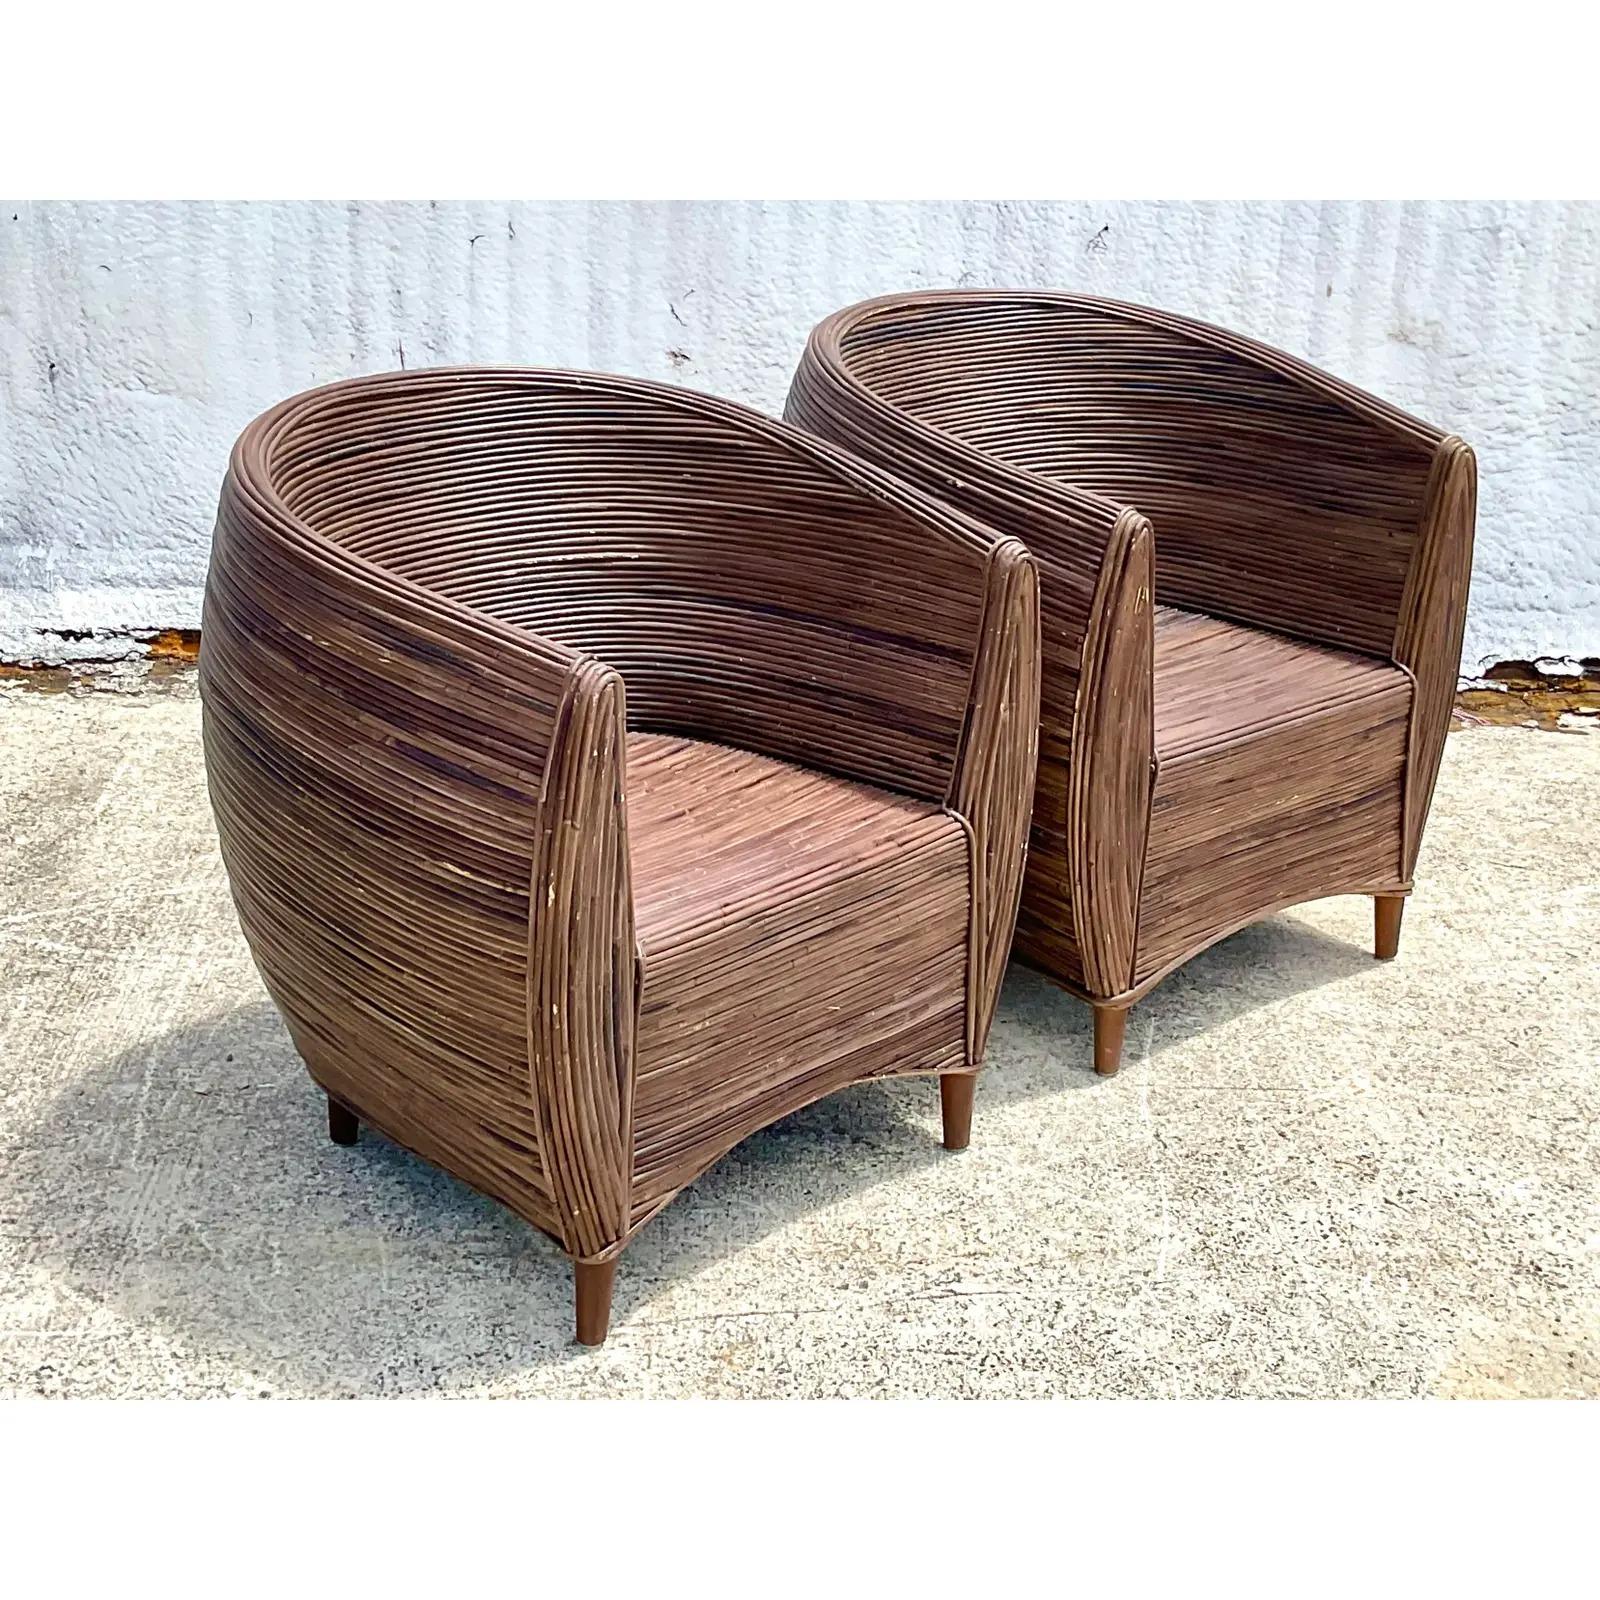 Philippine Vintage Coastal Pencil Reed Pod Chairs, a Pair